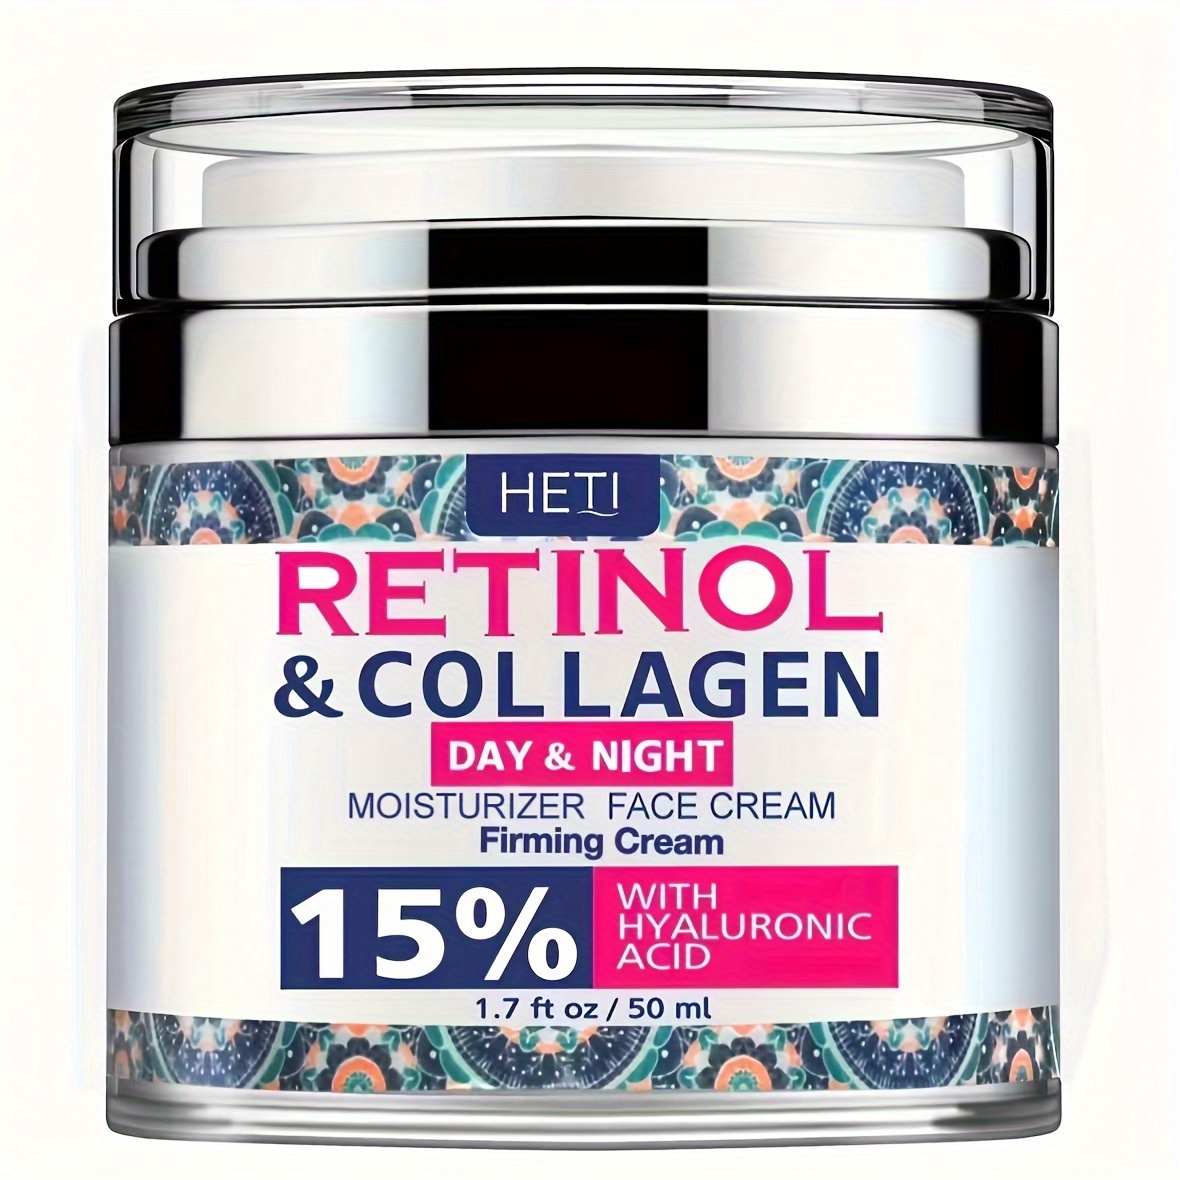 

Retinol Collagen Face Cream, With Hyaluronic Acid, Vitamin E, Morning And Night Cream, Available For Men And Women, Highly Moisturizing And Firming Face Cream